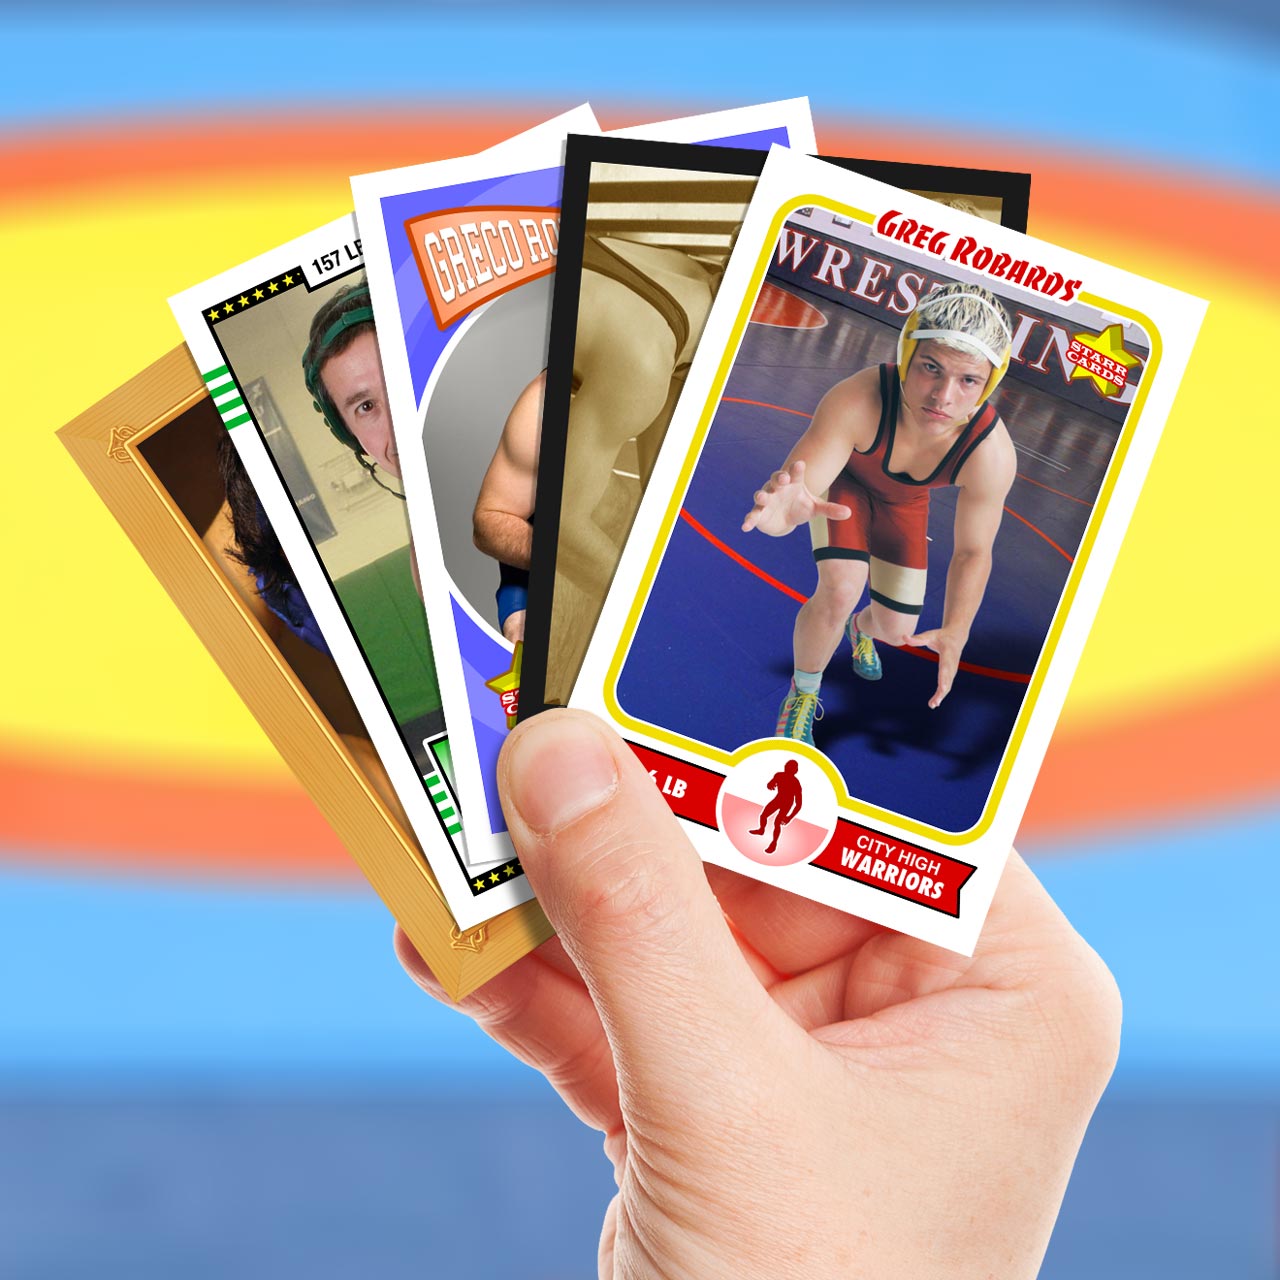 Make your own wrestling card with Starr Cards.